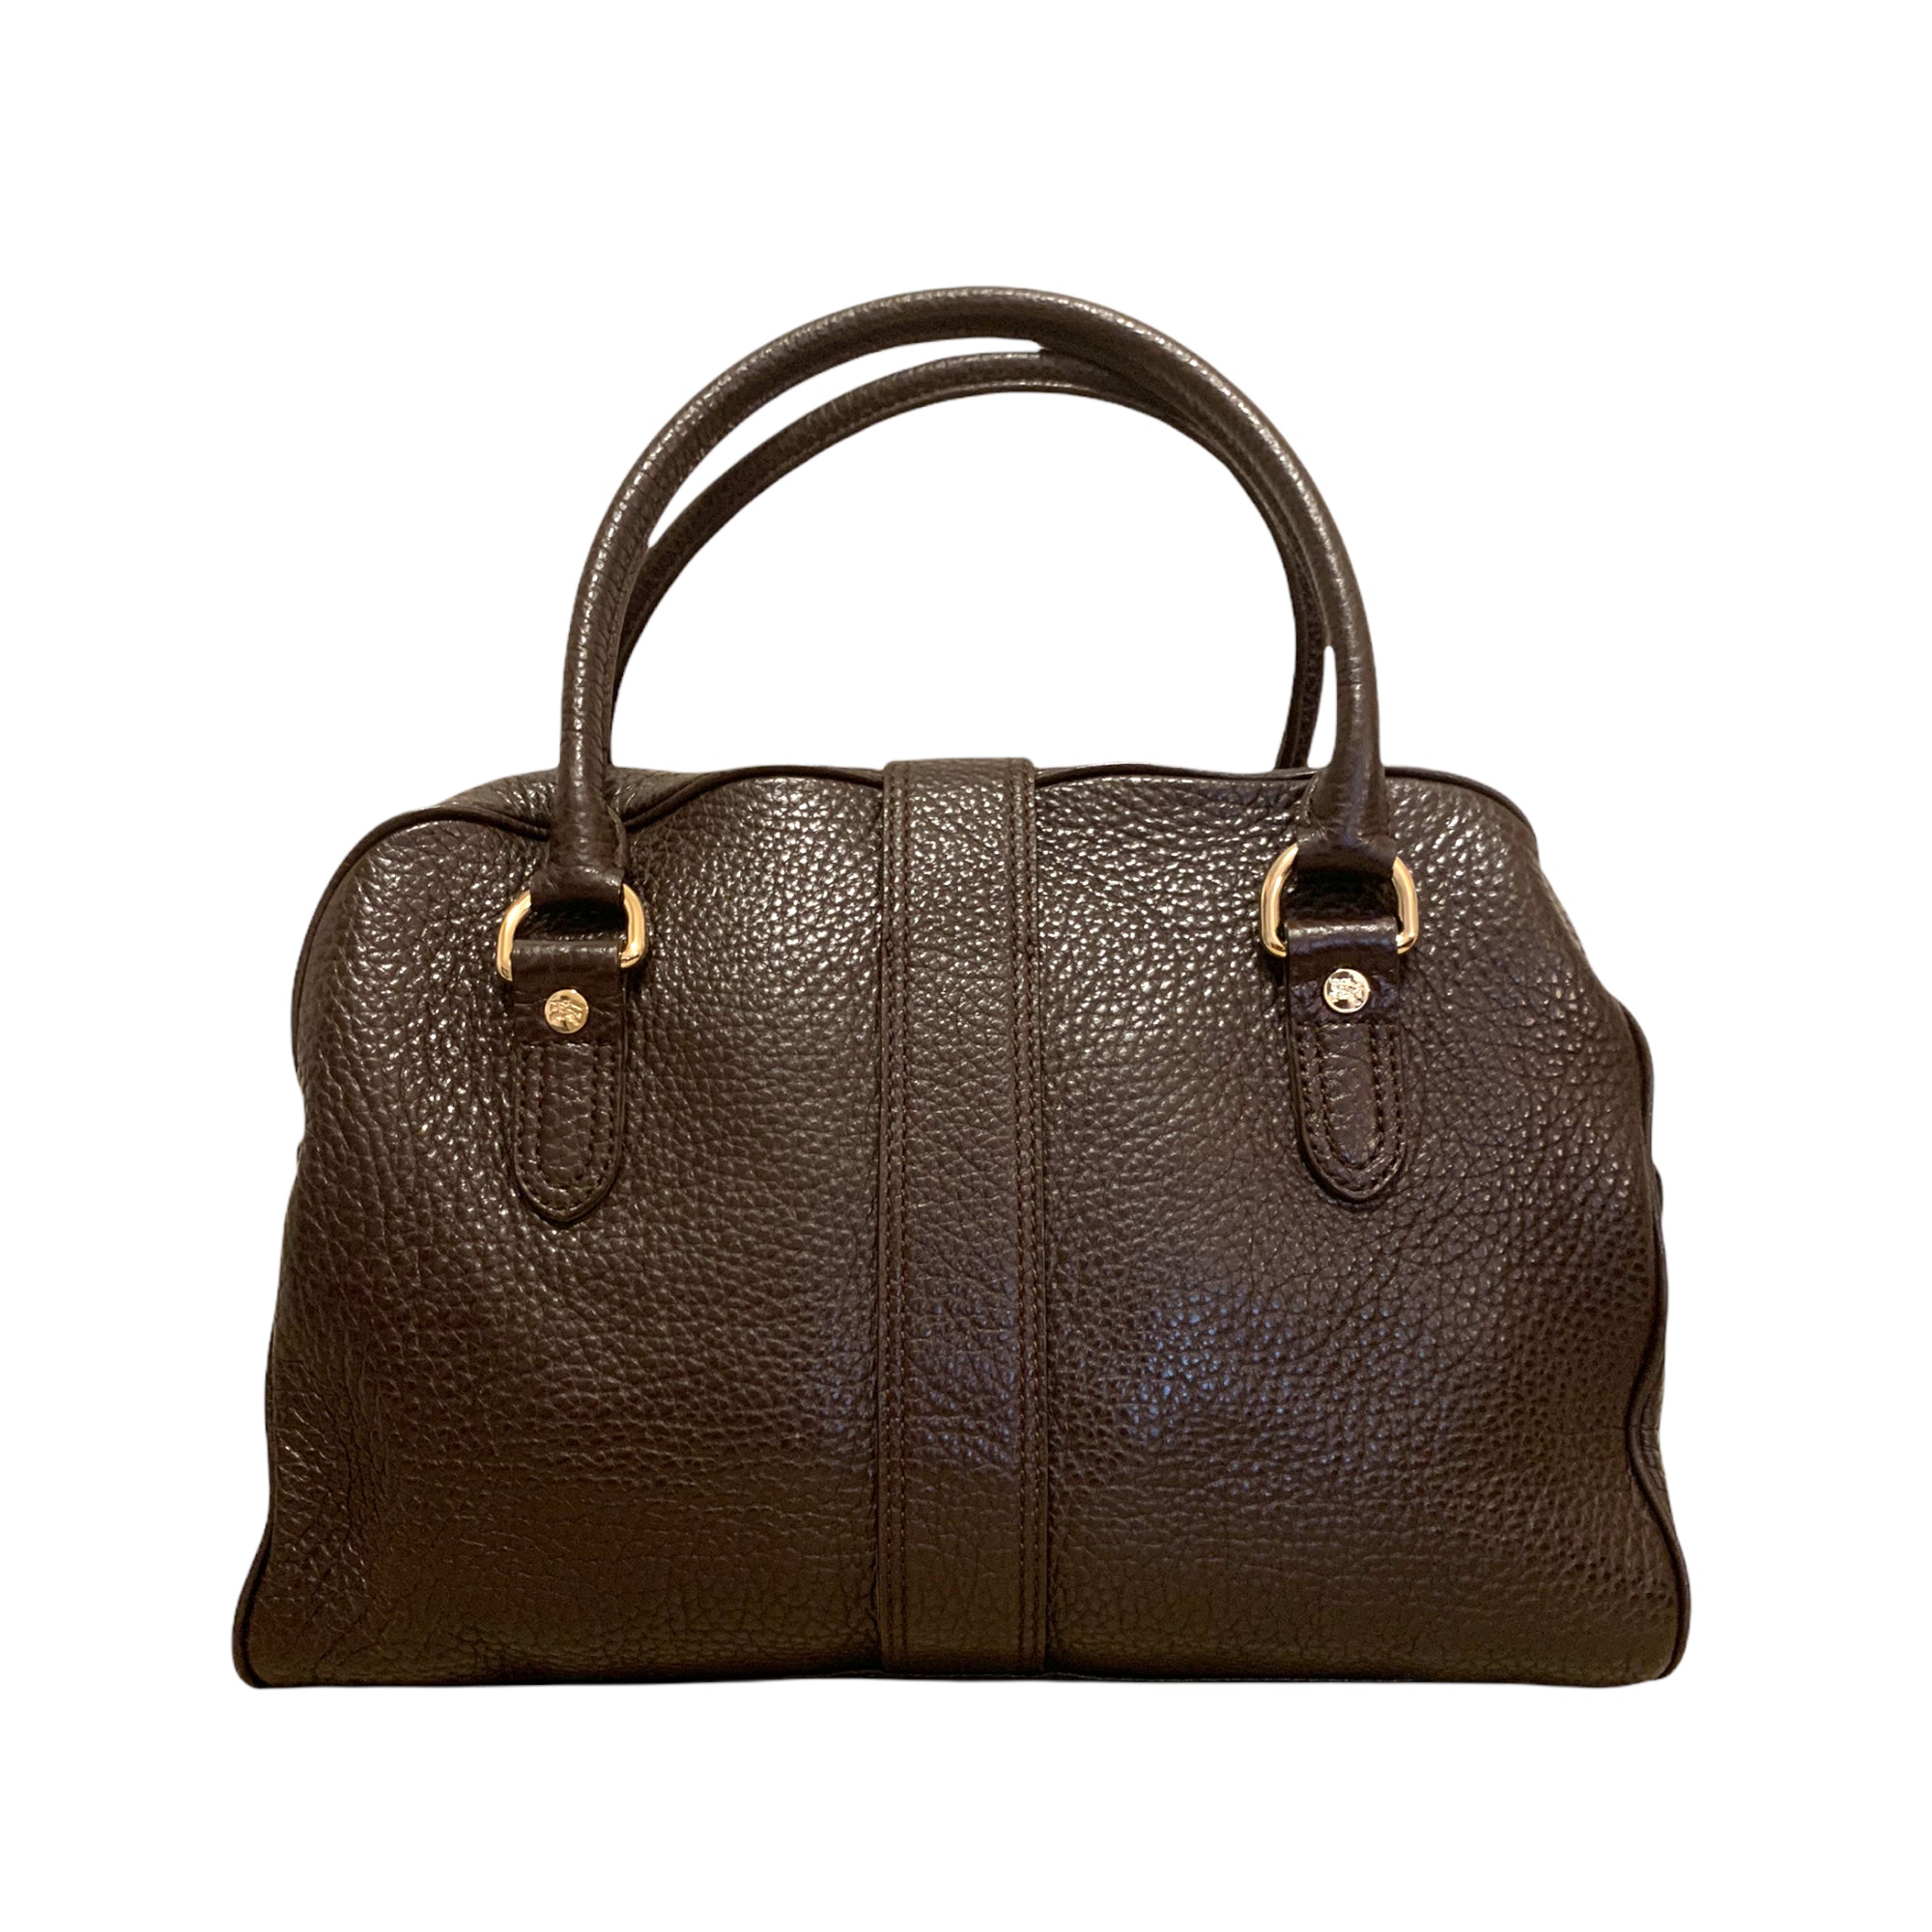 Burberry Chocolate Brown Grained Leather Travel Tote